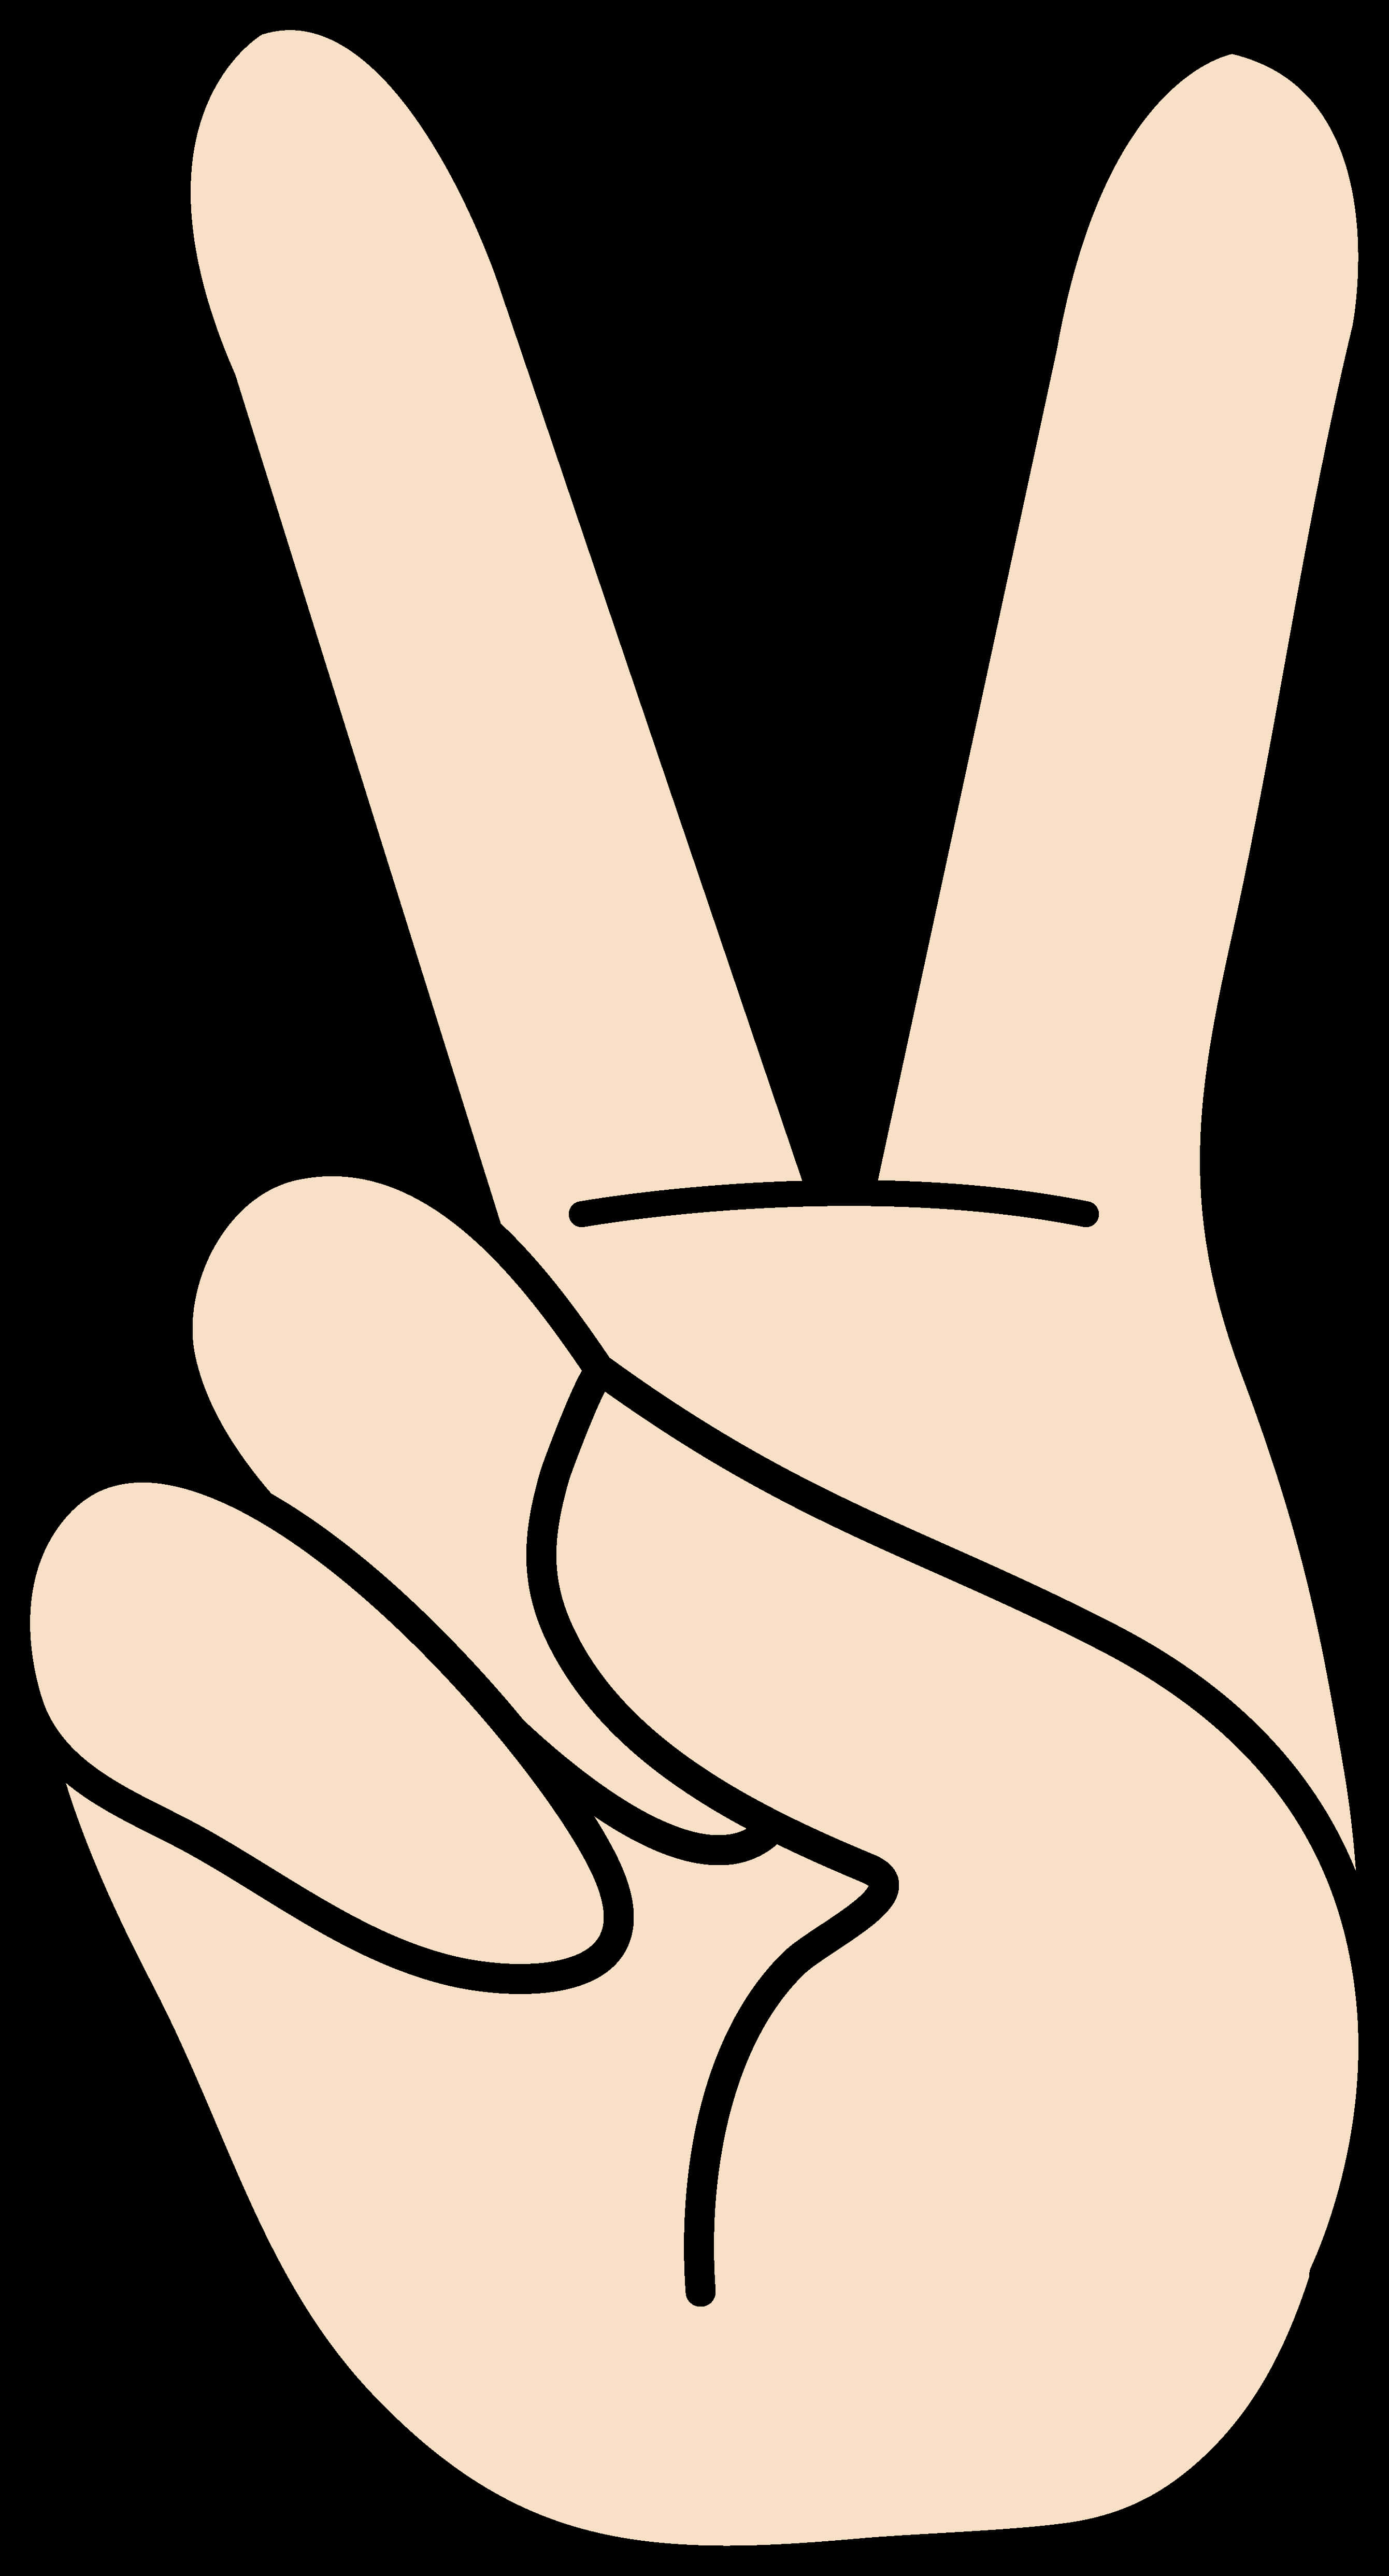 Peace Sign Hand Gesture Illustration PNG image